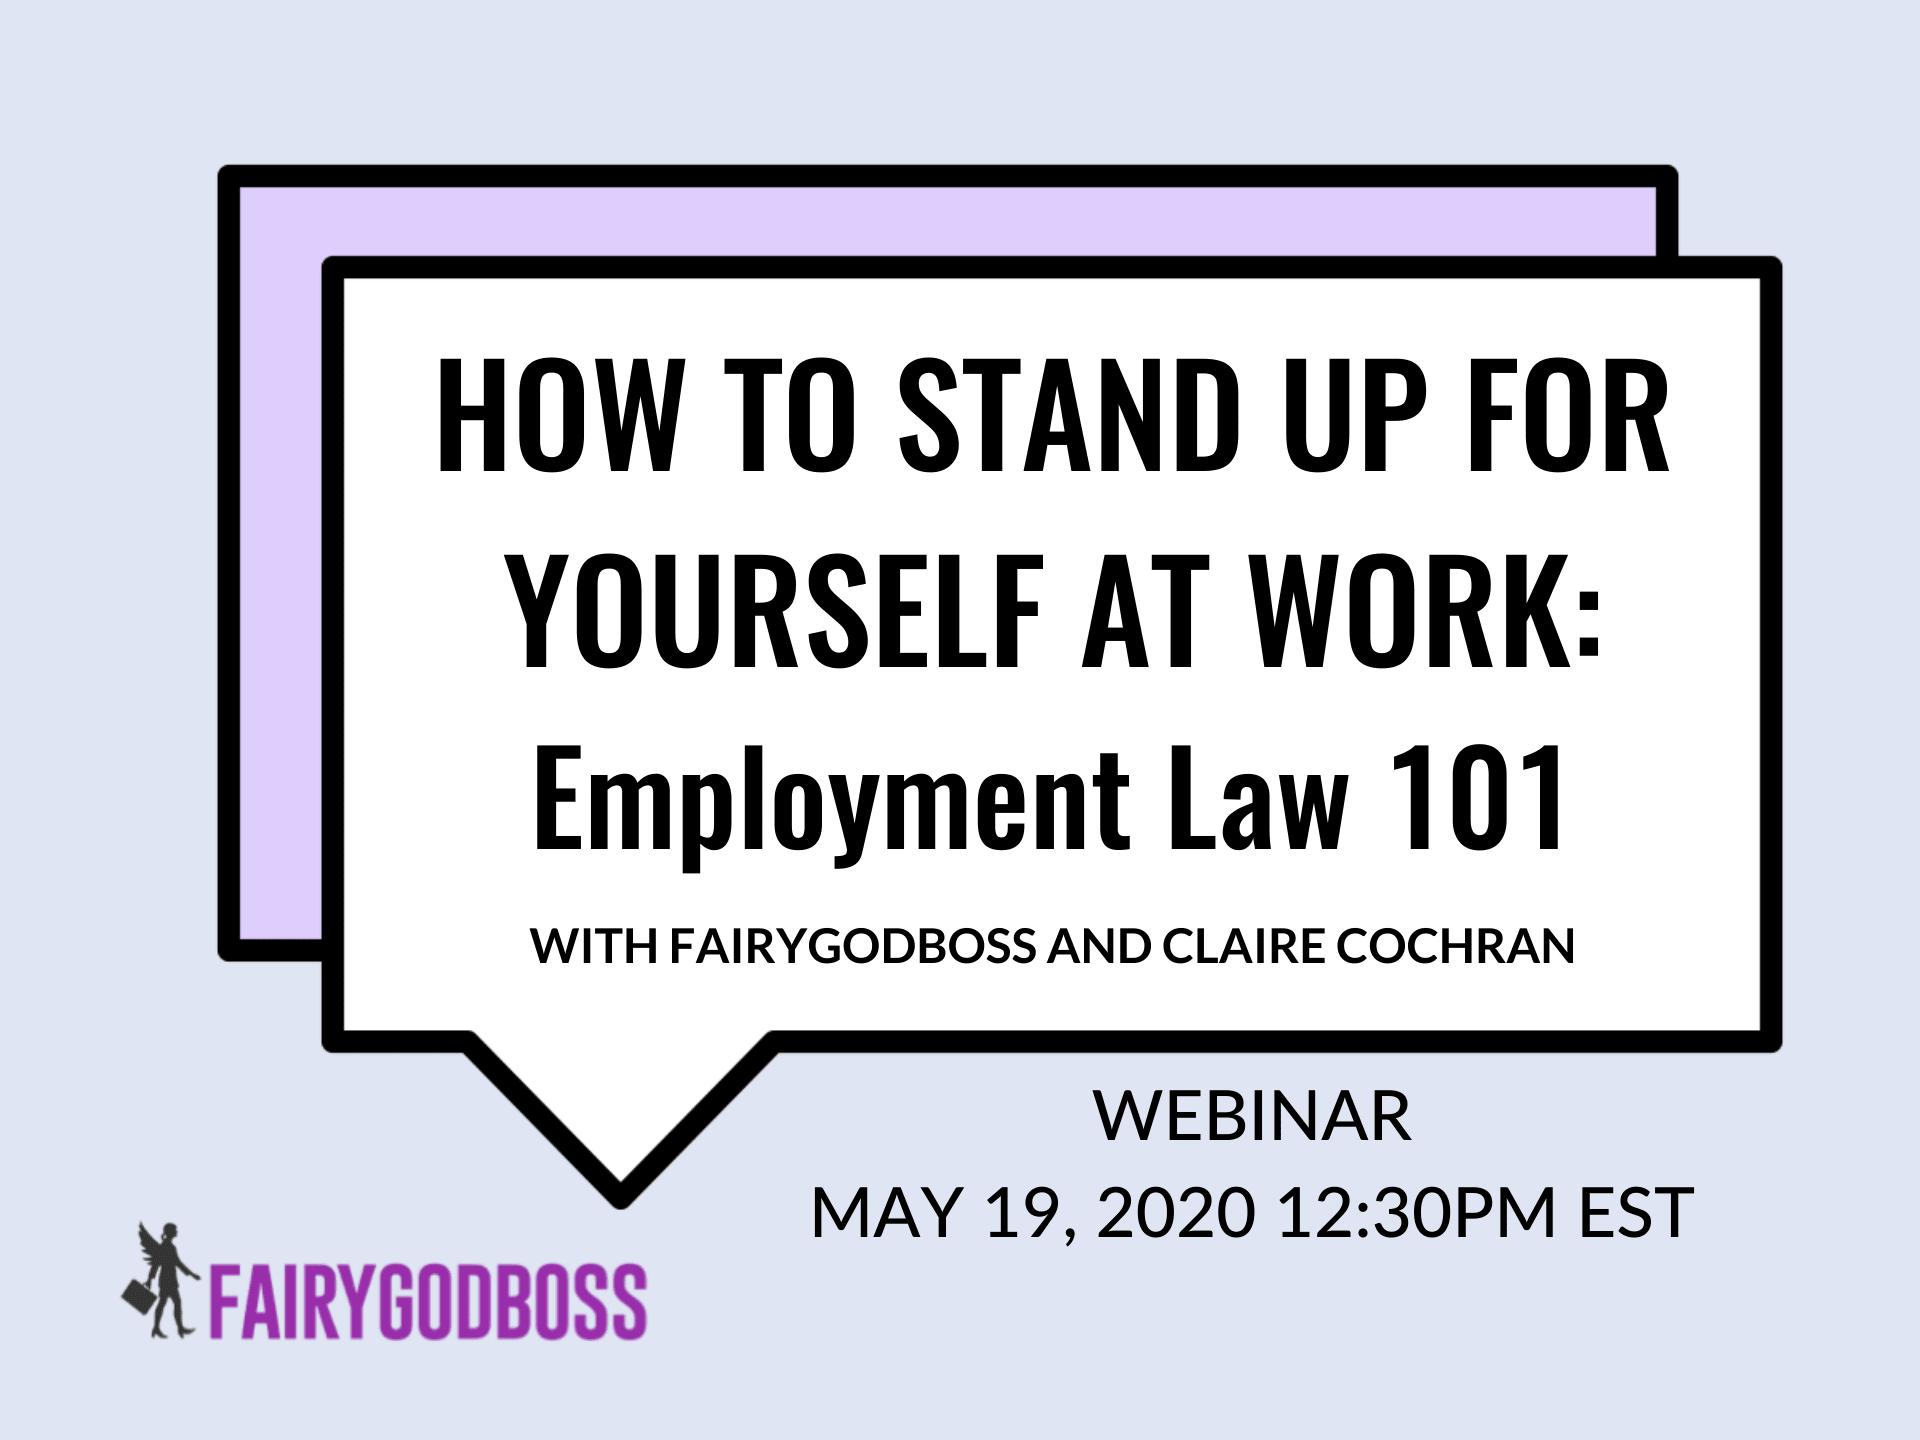 How To Stand Up For Yourself At Work: Employment Law 101